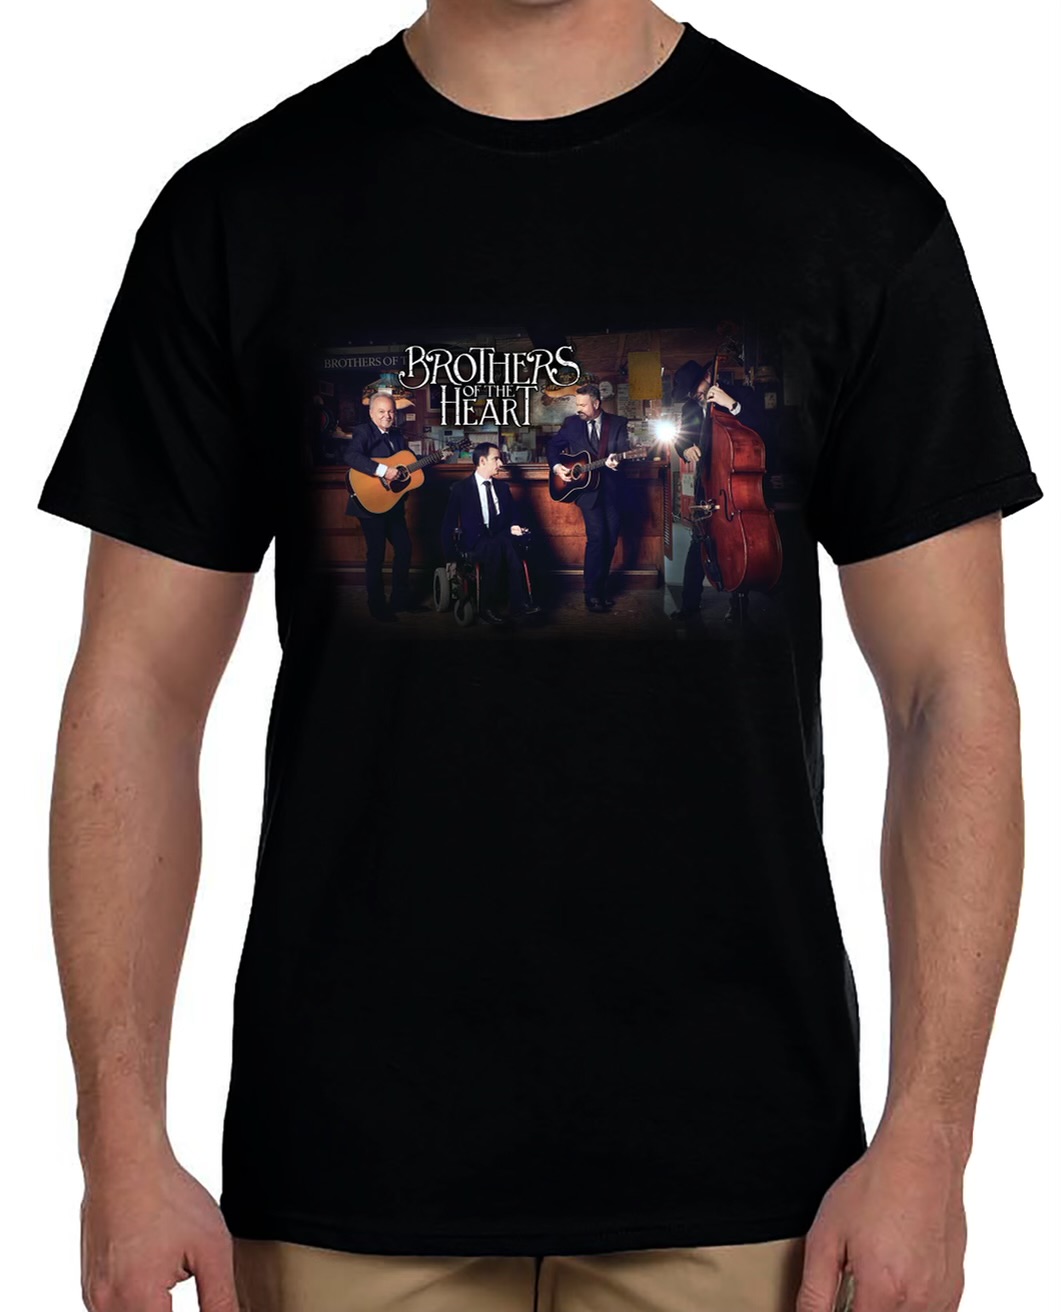 Brothers of the Heart black picture tee - Jimmy Fortune